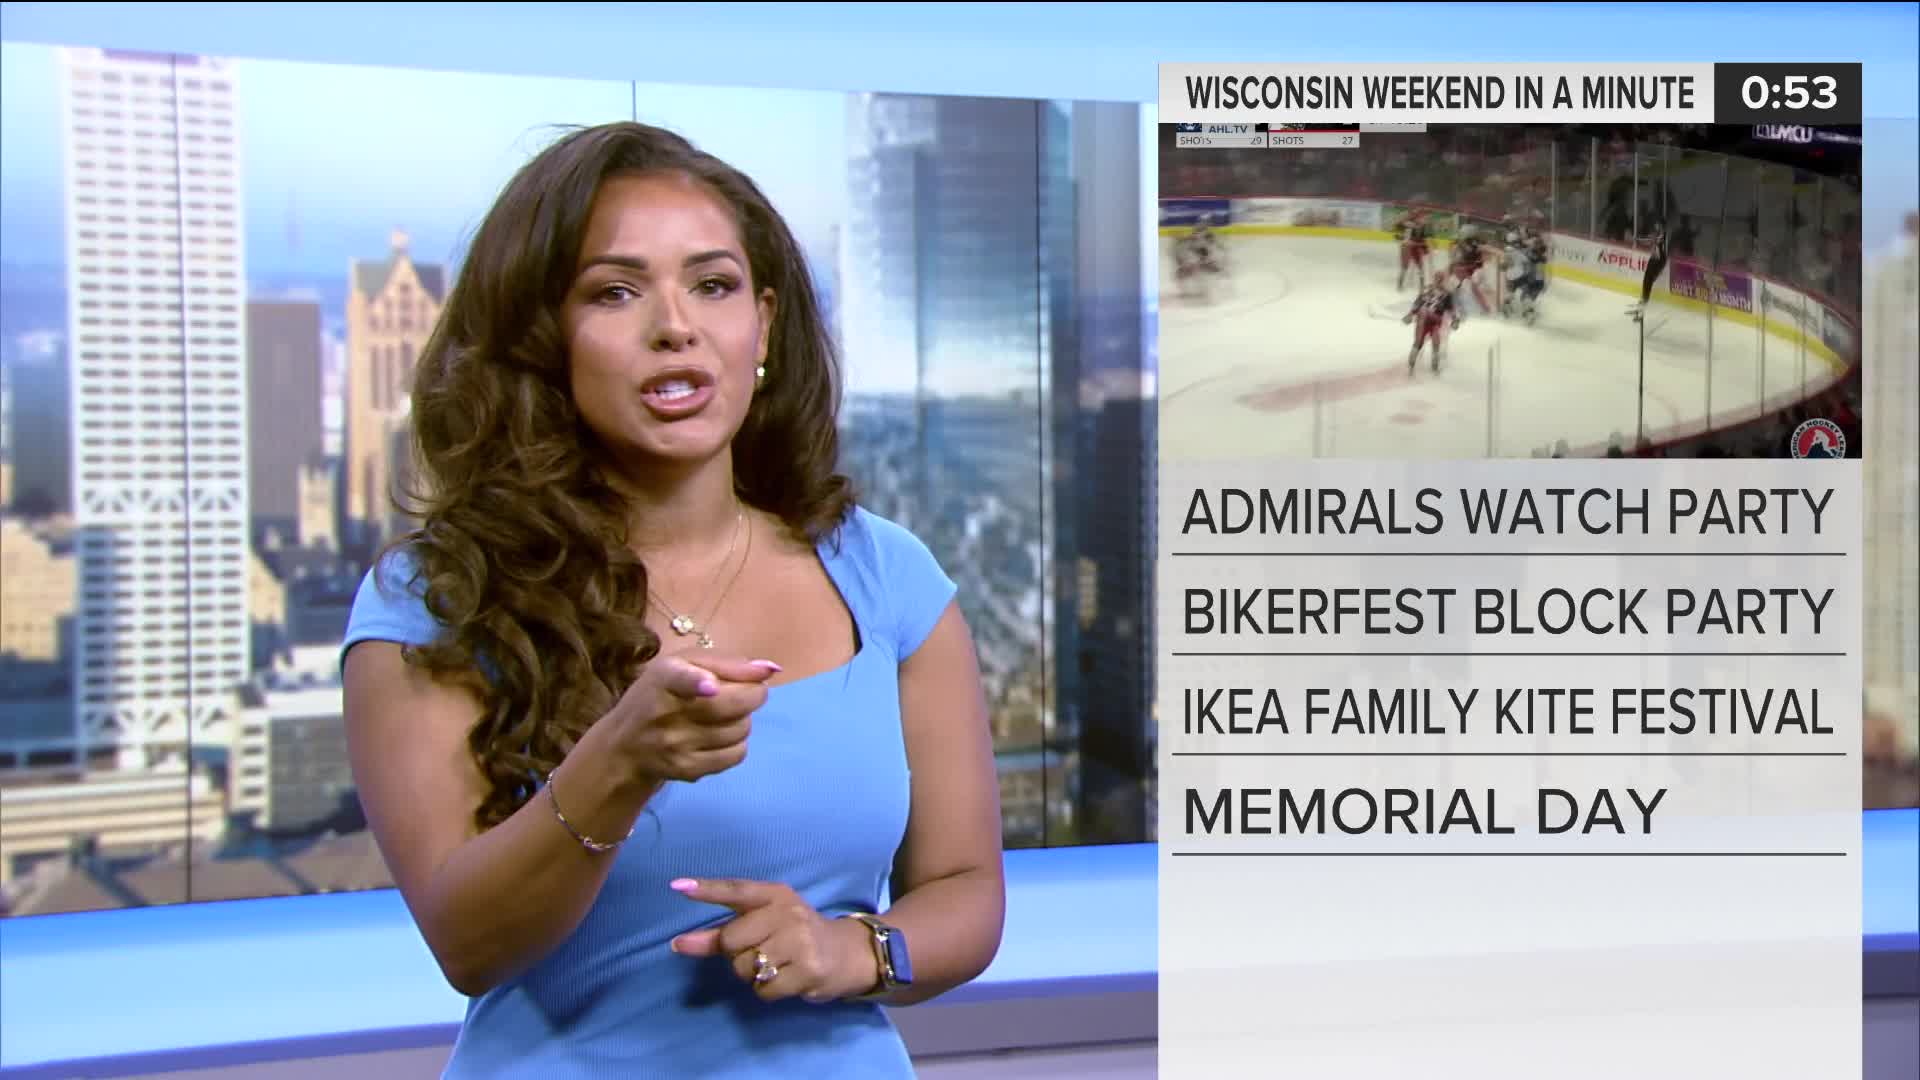 Wisconsin Weekend in a Minute: The Ikea Family Kite Festival and Memorial Day remembrance ceremonies